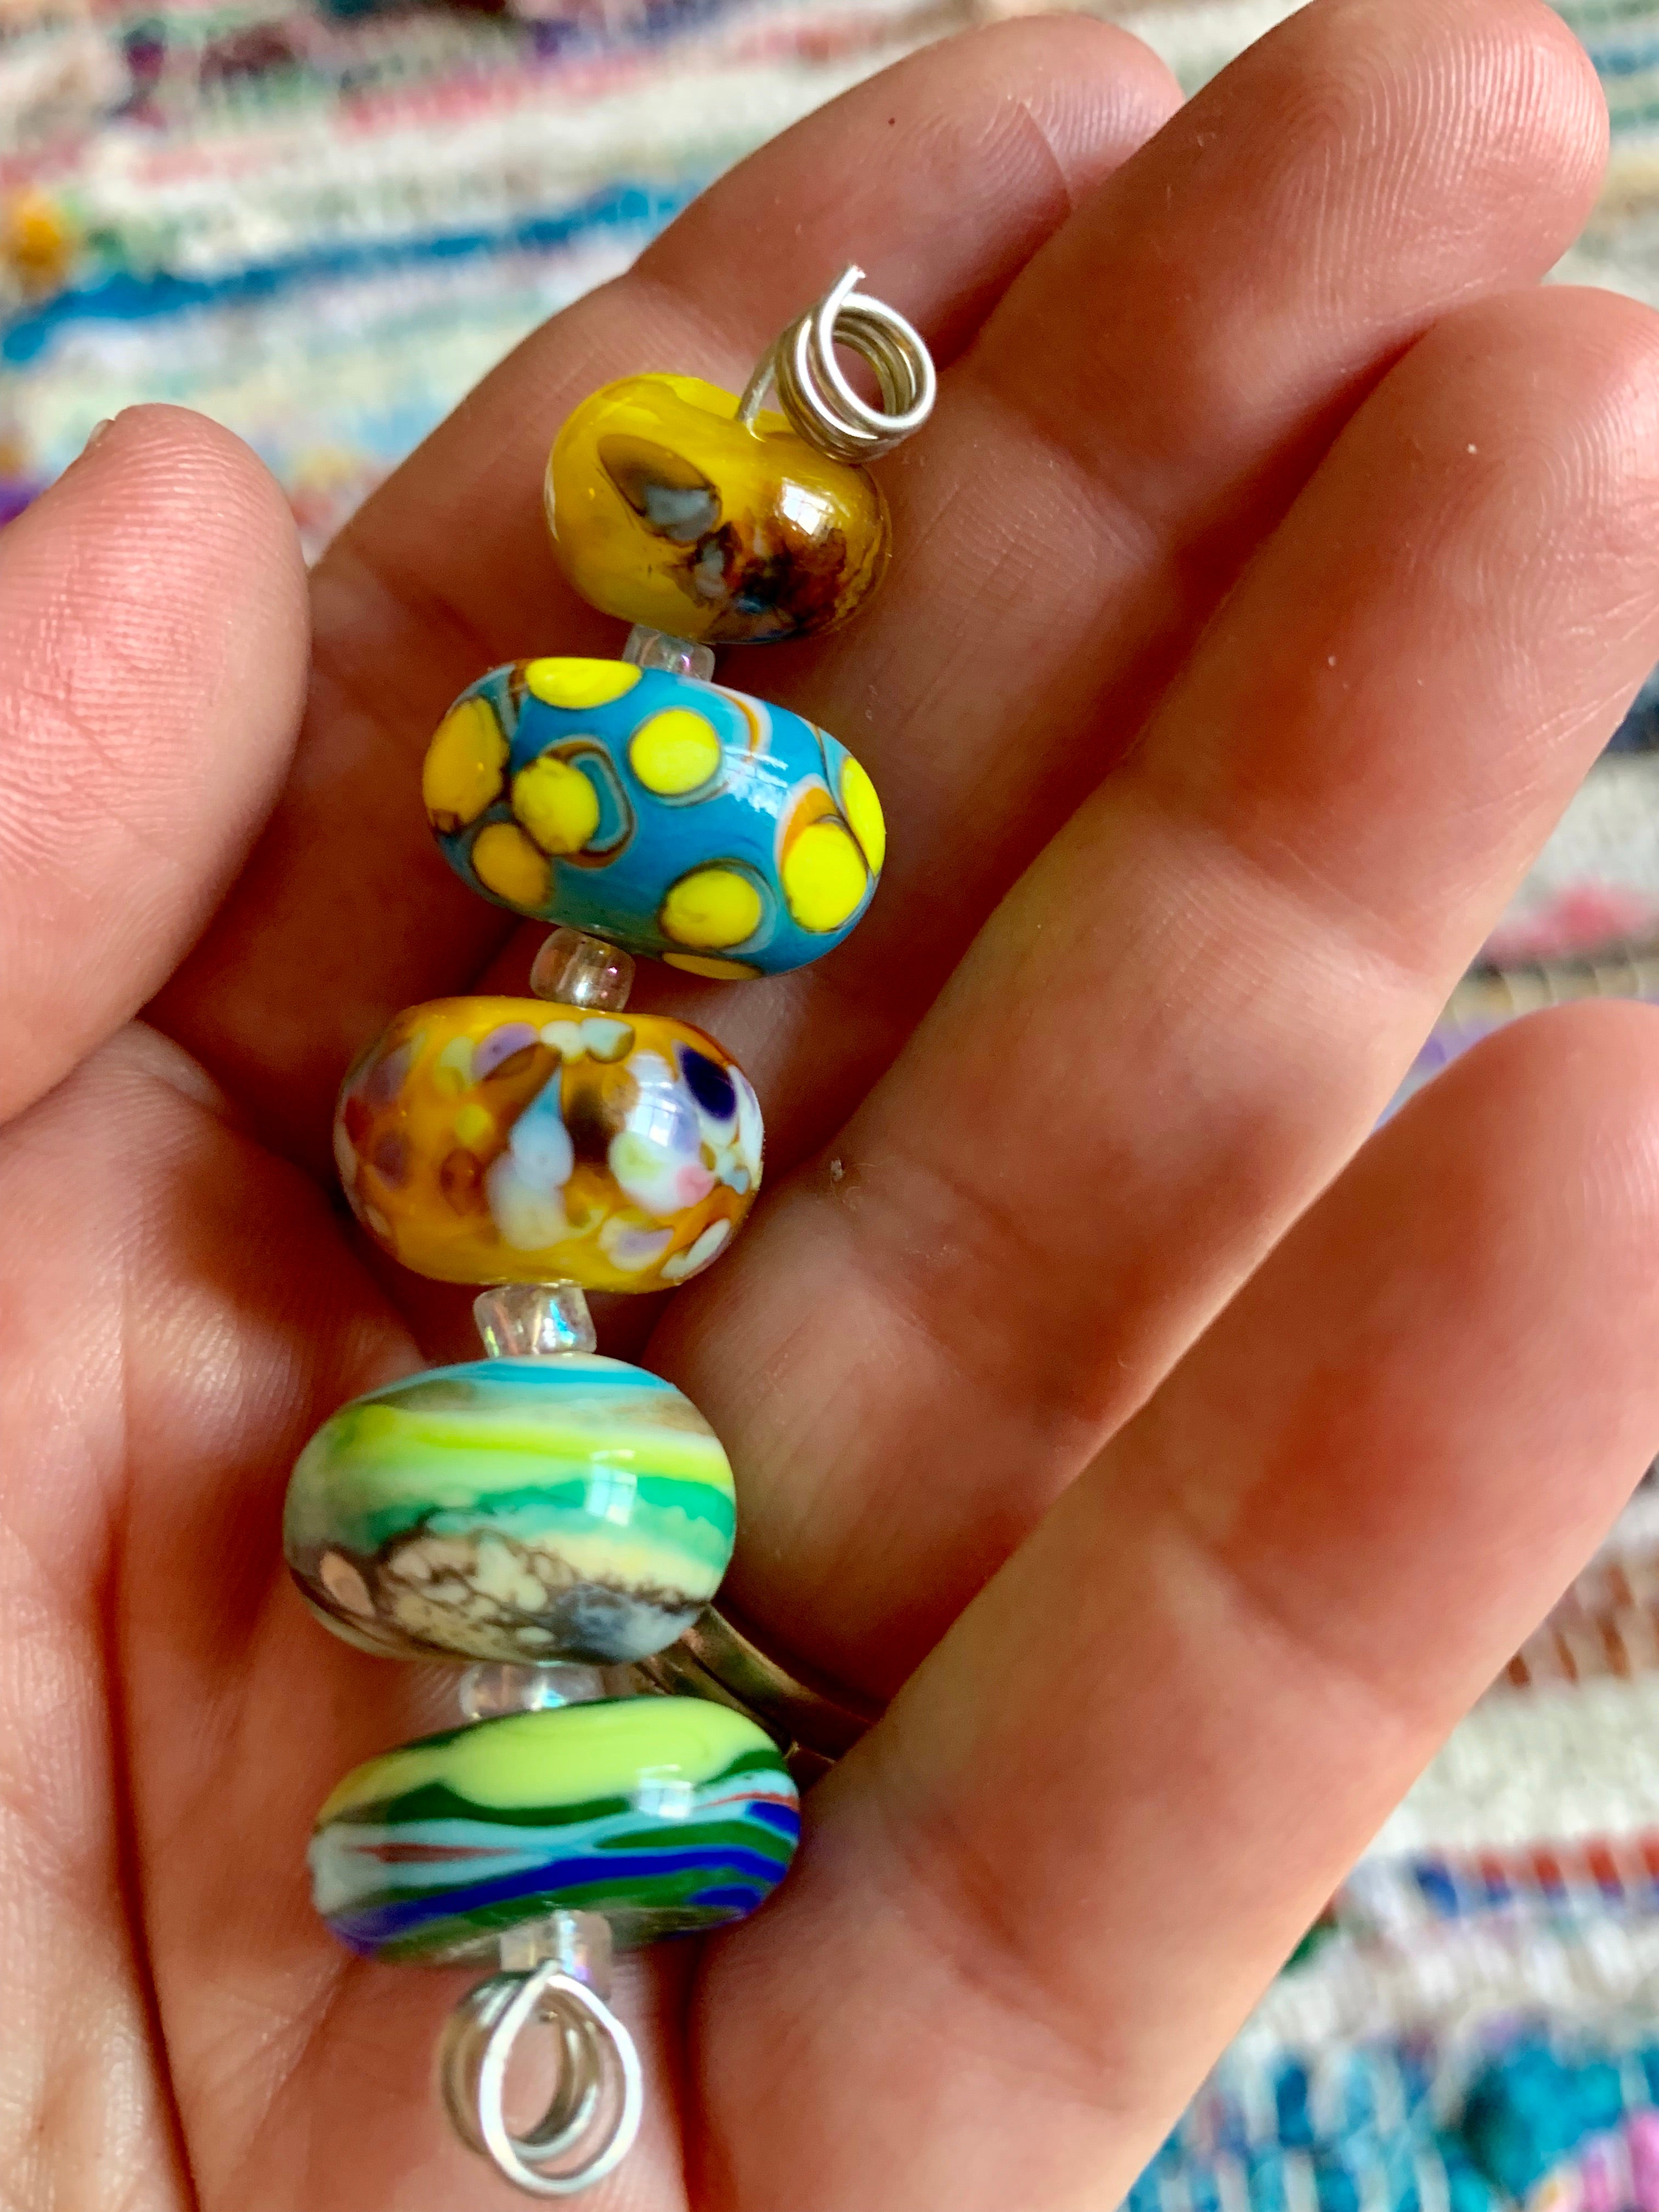 Set of 5 summery lampwork glass beads in yellows, teal, blues, and greens